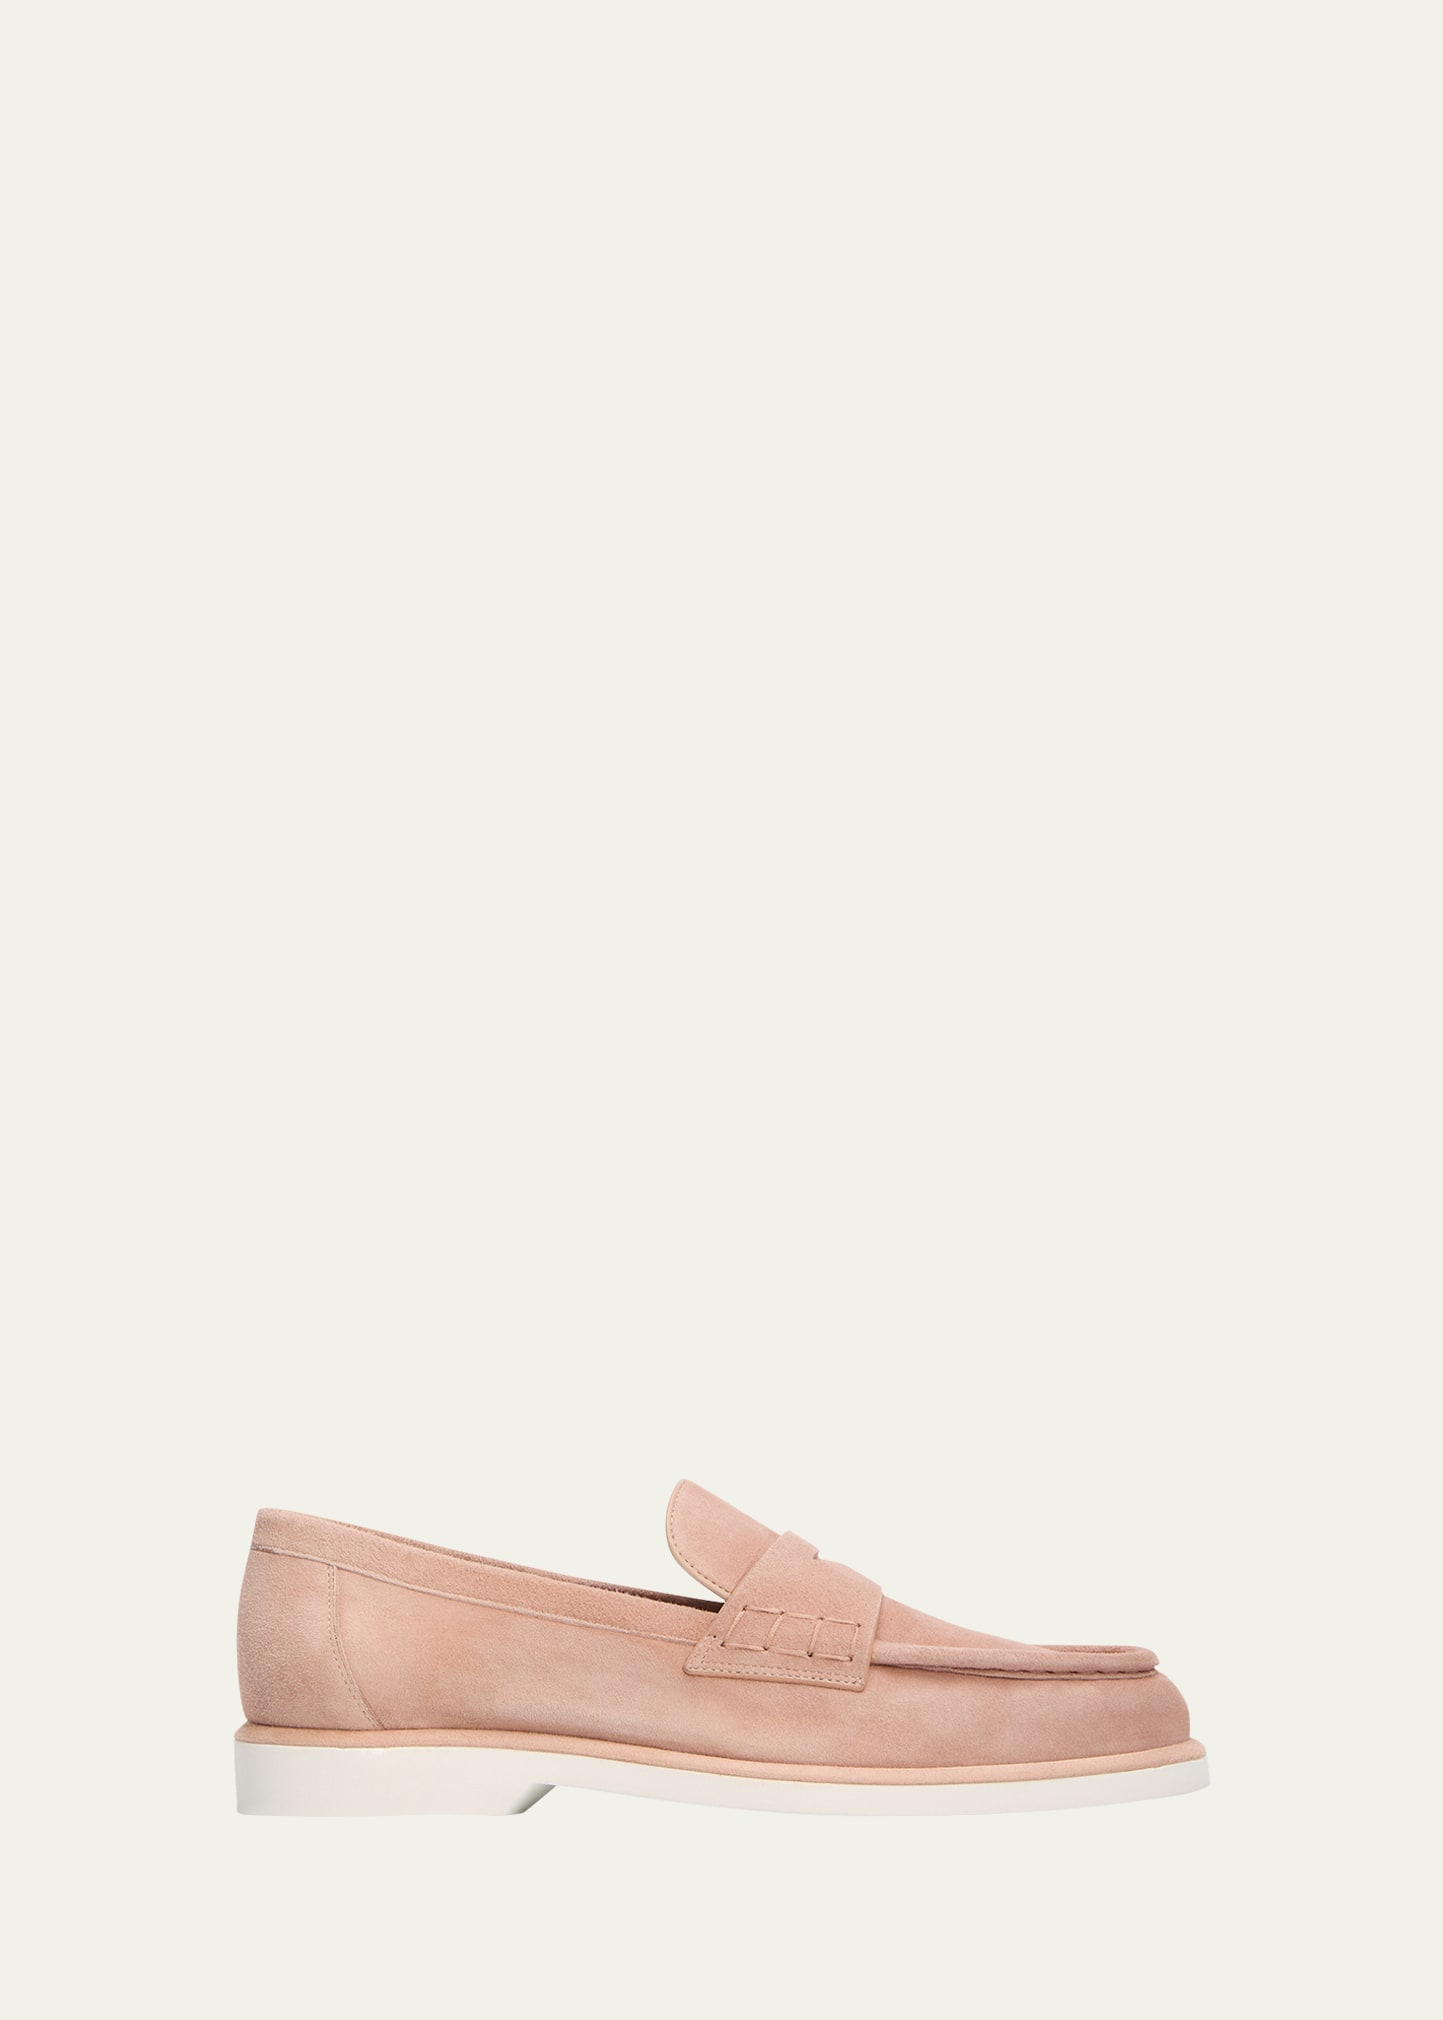 Santoni Funnel Suede Casual Penny Loafers In Pink